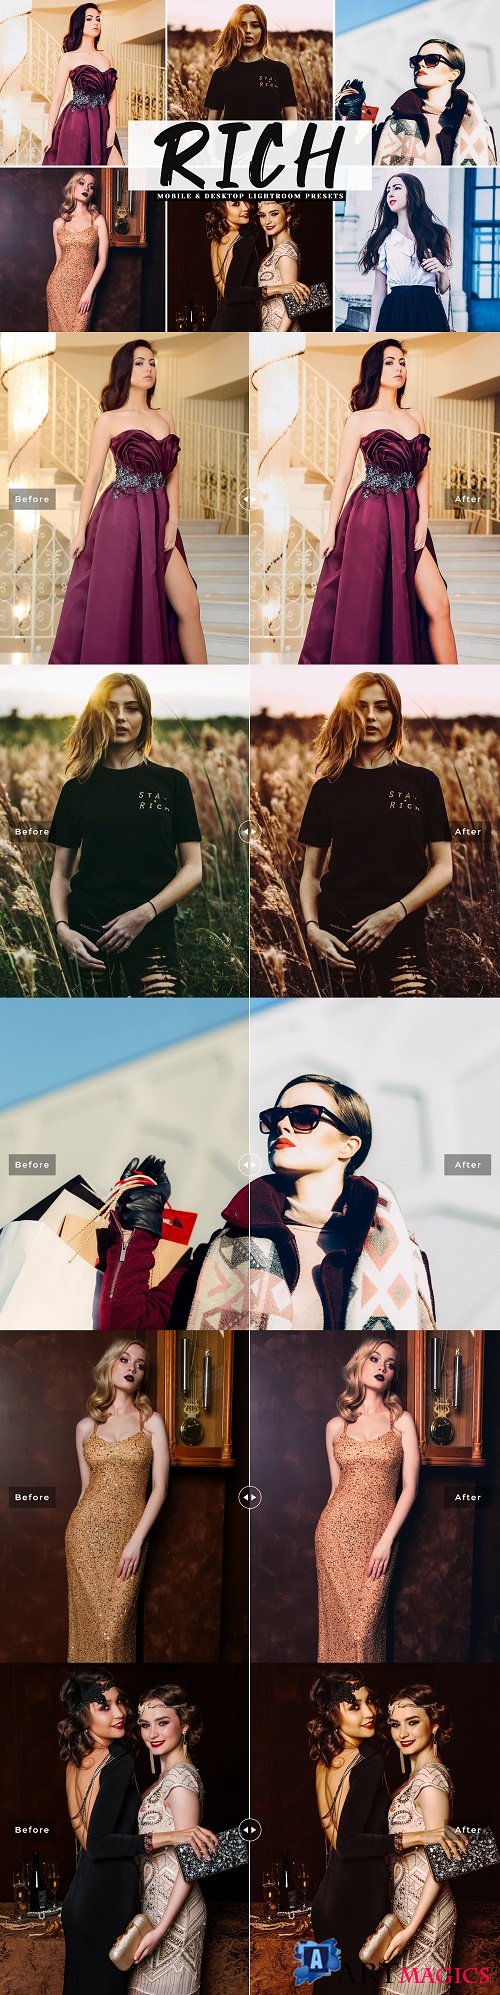 Rich Lightroom Presets Collection - 4068073